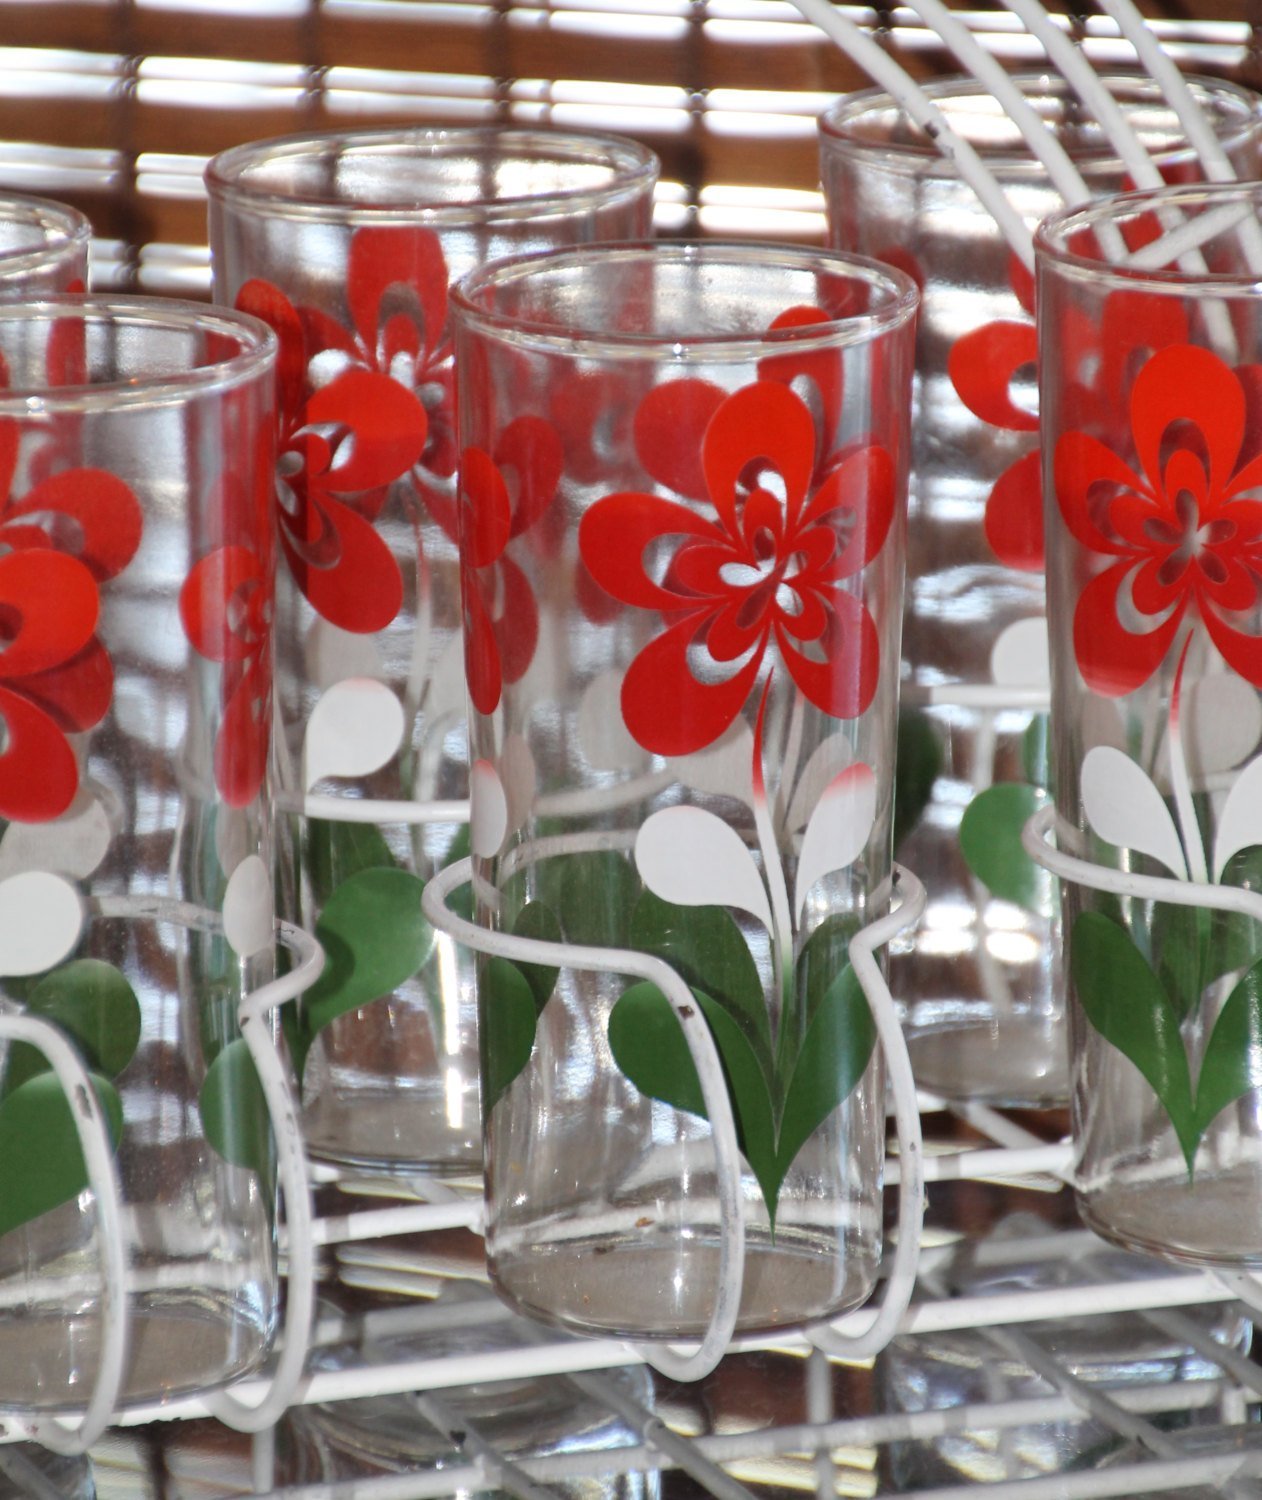 Vintage Glassware 1960s Tall Tumbler Glasses. White Red and Green Flor